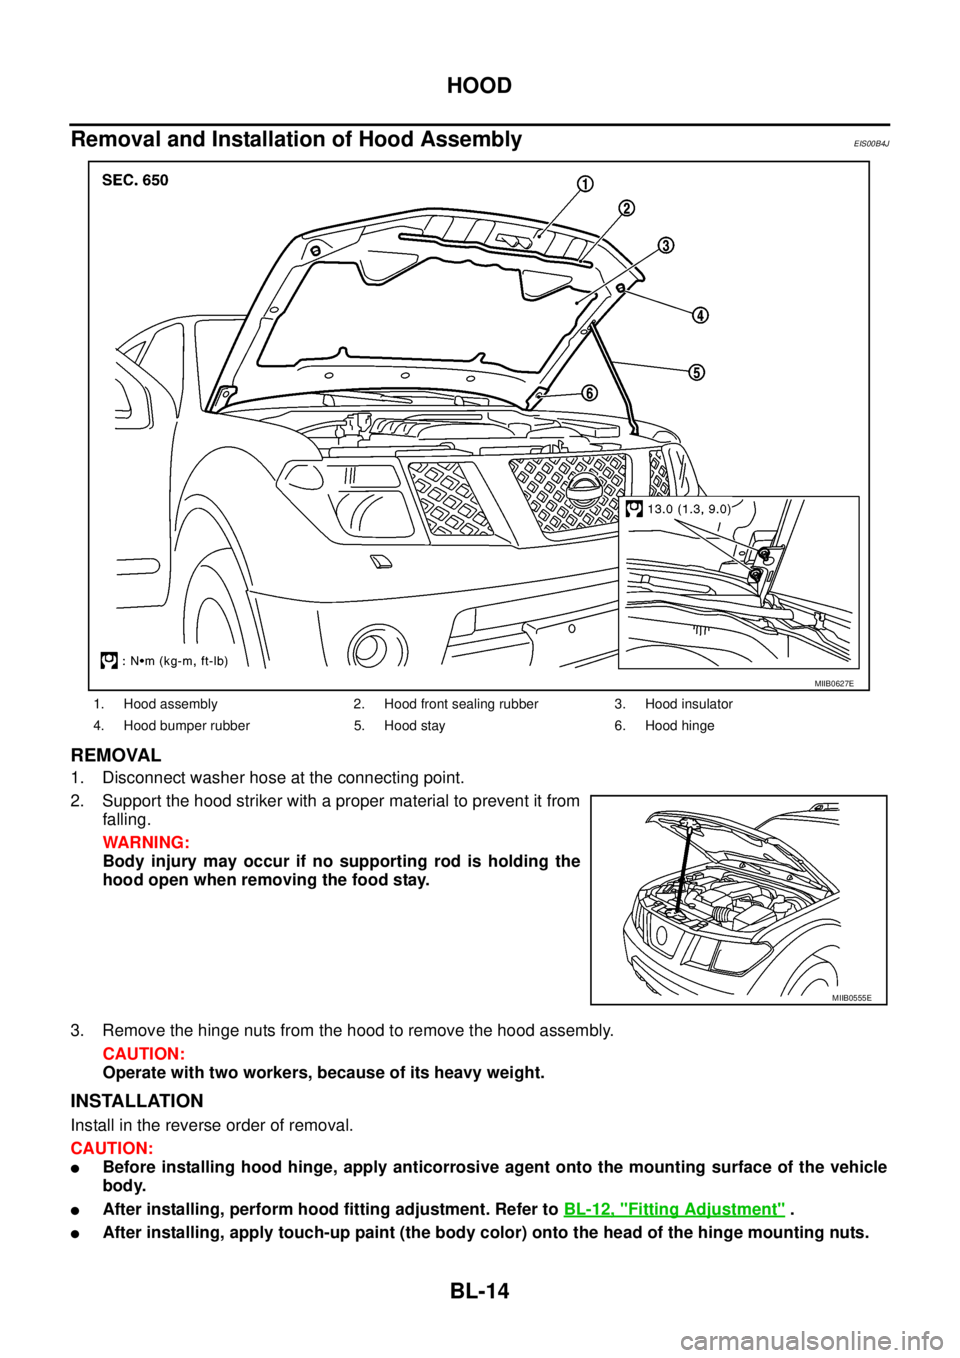 NISSAN NAVARA 2005  Repair Workshop Manual BL-14
HOOD
Removal and Installation of Hood Assembly
EIS00B4J
REMOVAL
1. Disconnect washer hose at the connecting point.
2. Support the hood striker with a proper material to prevent it from
falling.
